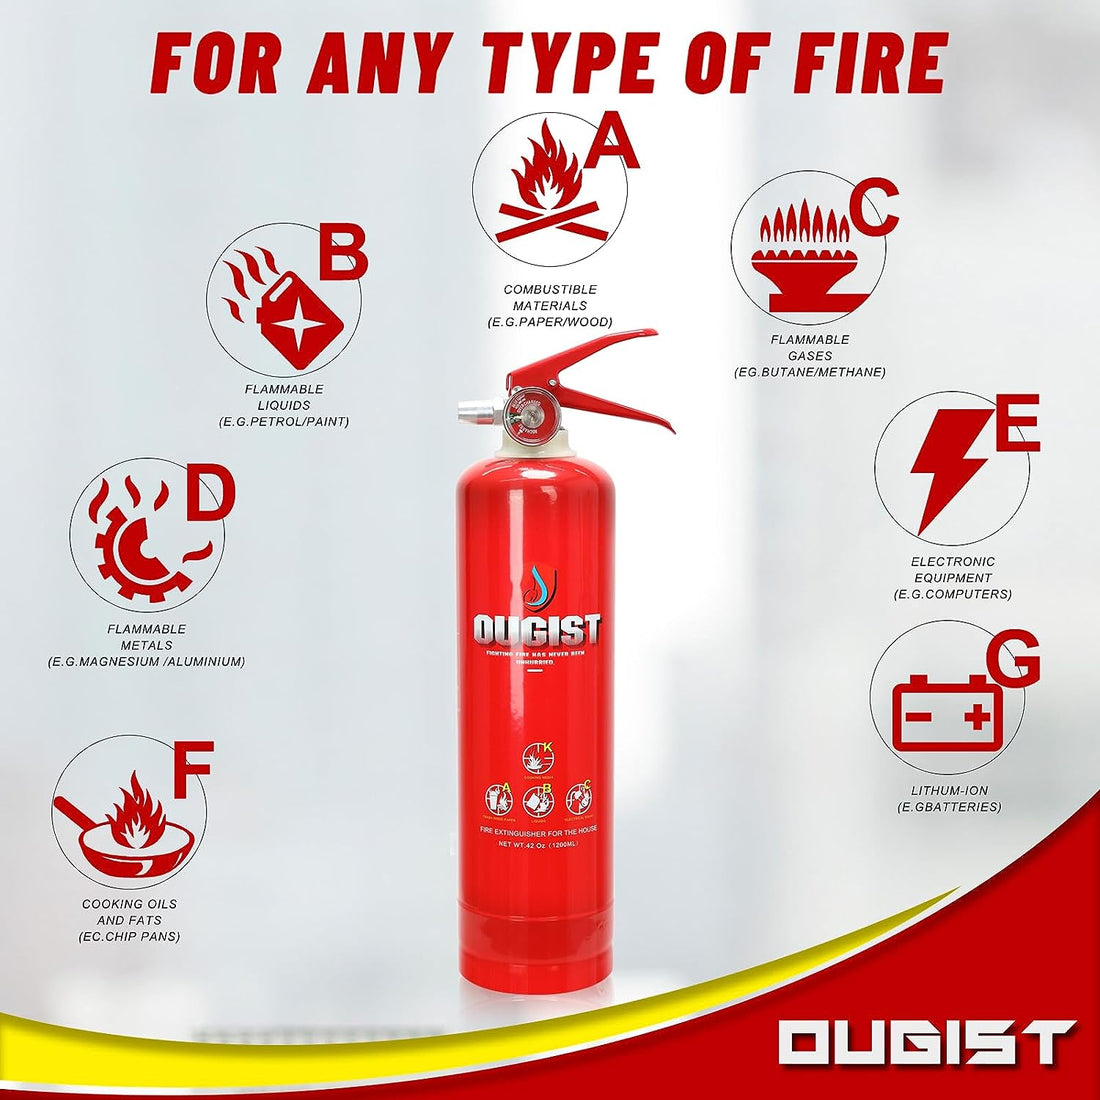 How often should a fire extinguisher be serviced?